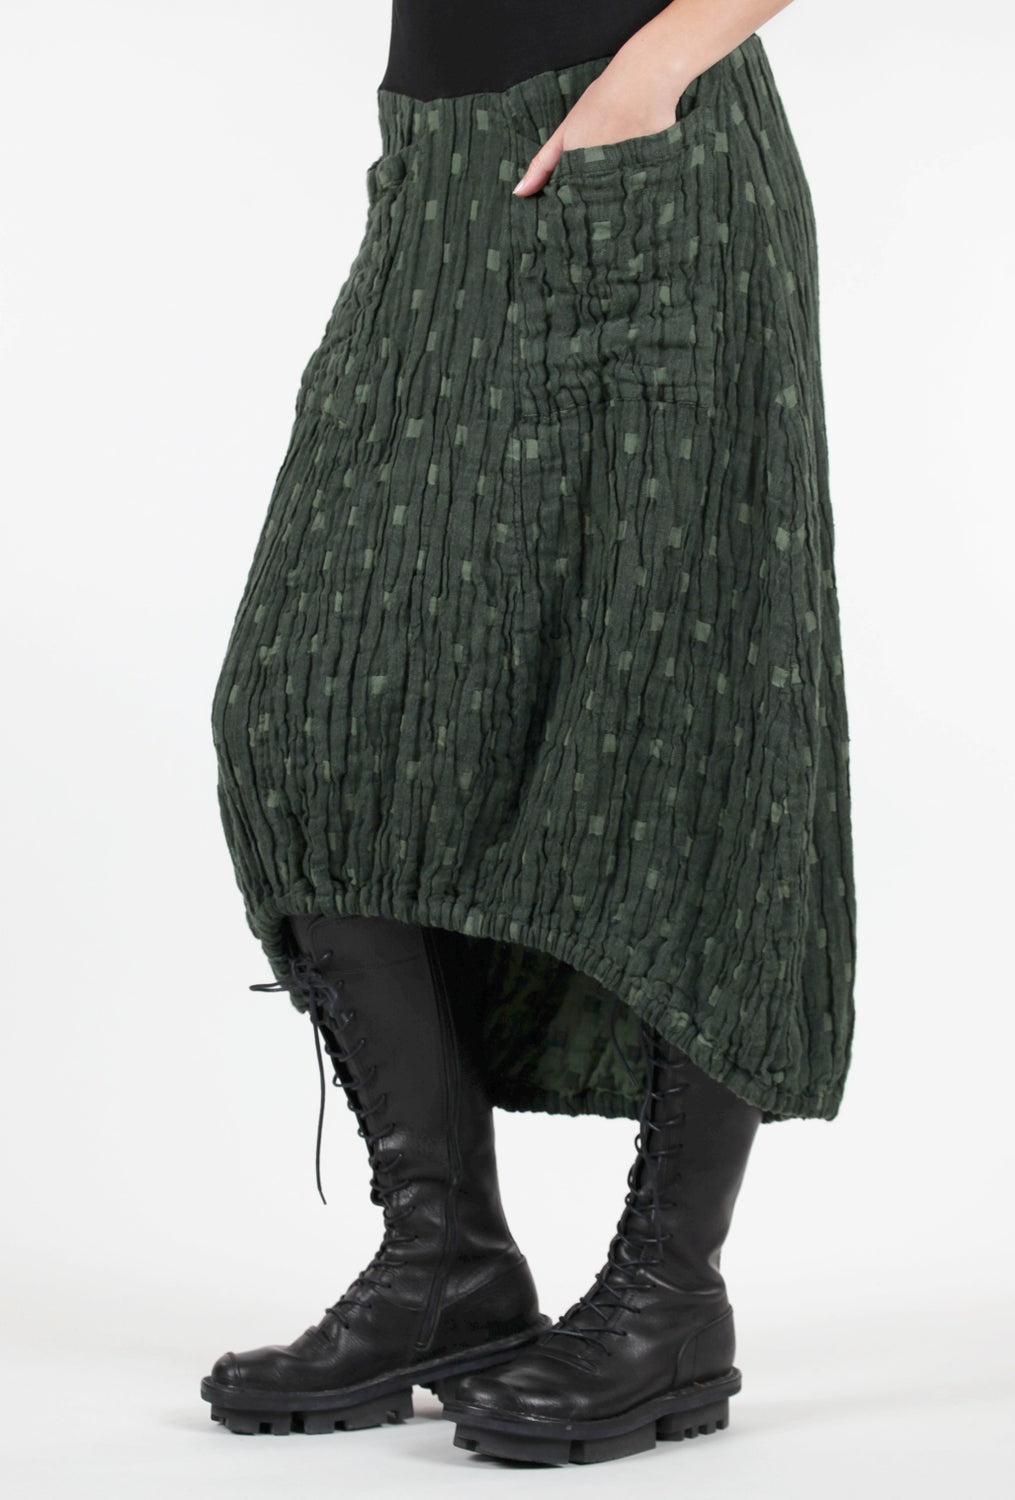 Grizas Pucker Square Skirt, Forest 